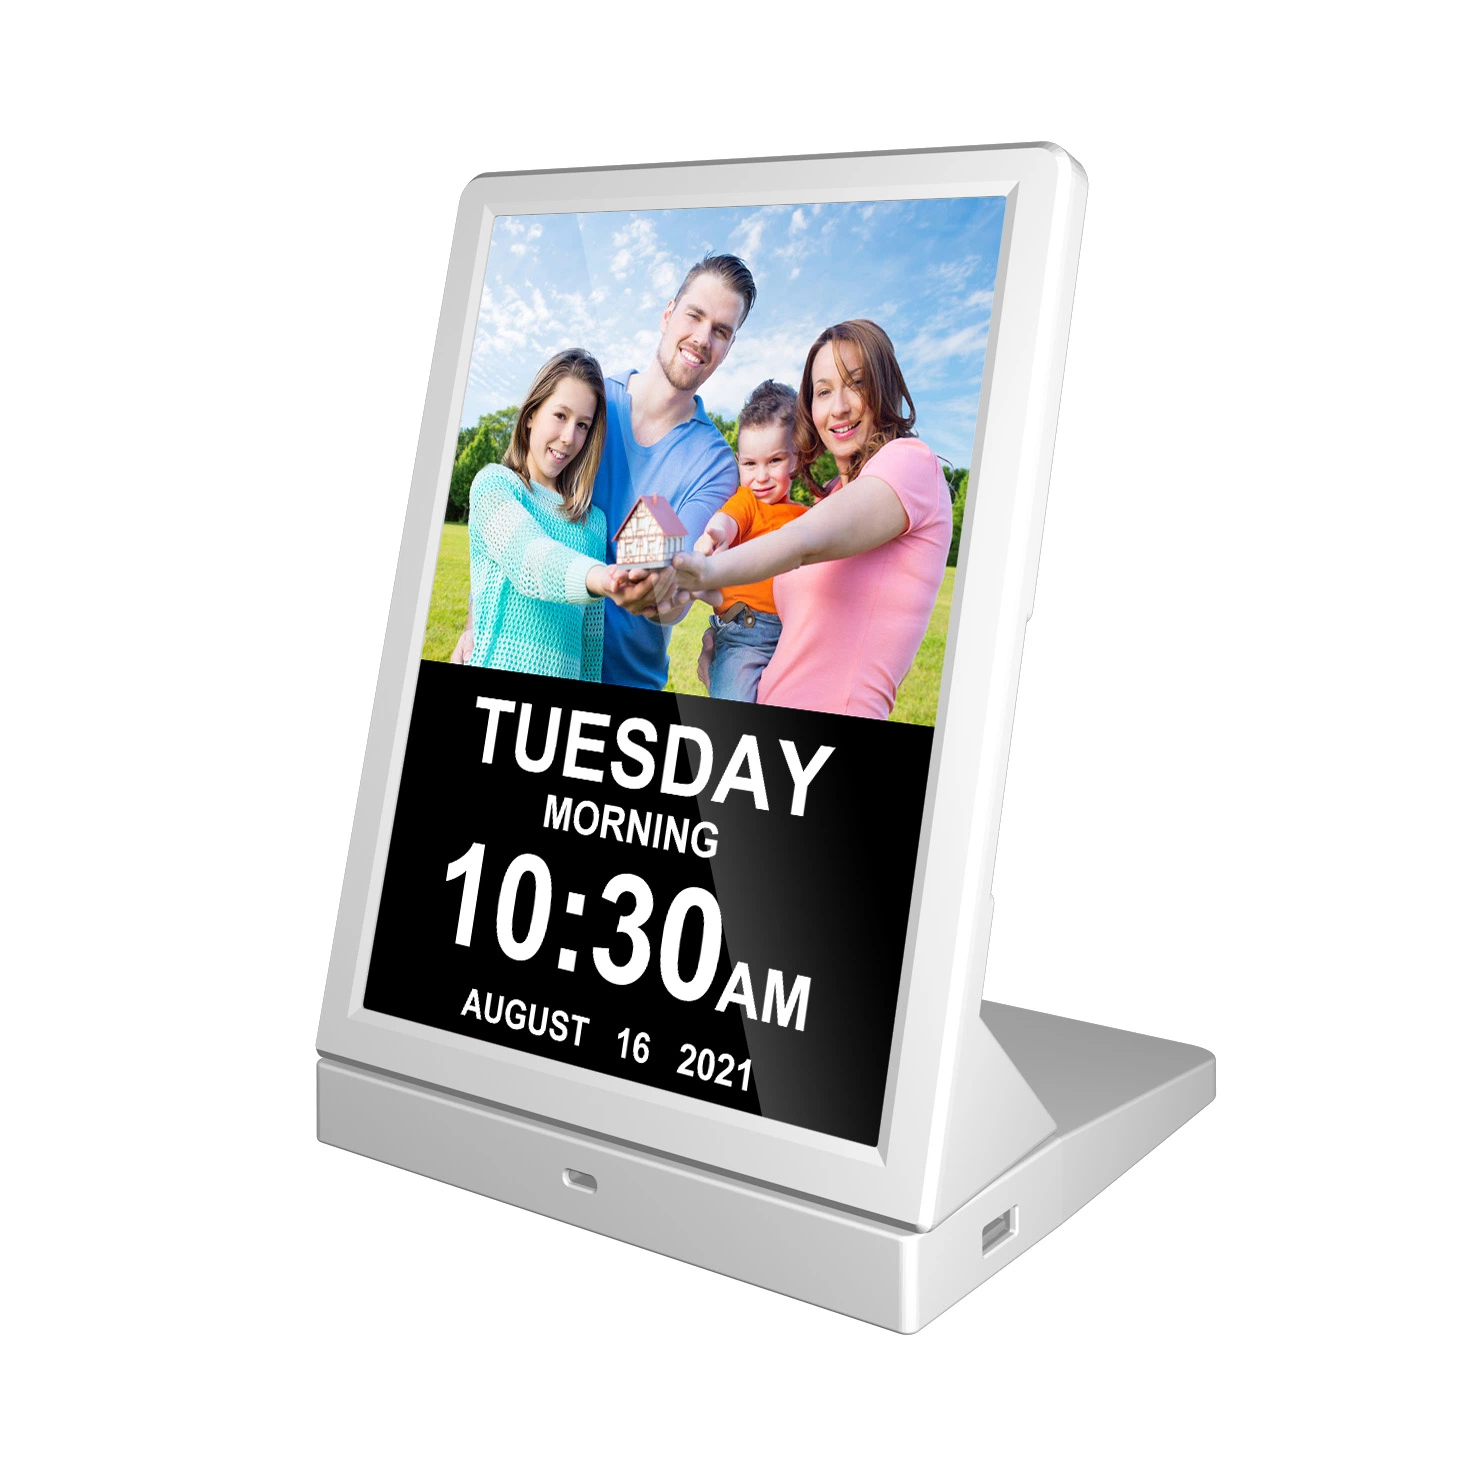 Type-C Fast Charger New Battery Operated LCD Display 9.7 Inch Digital Photo Frame